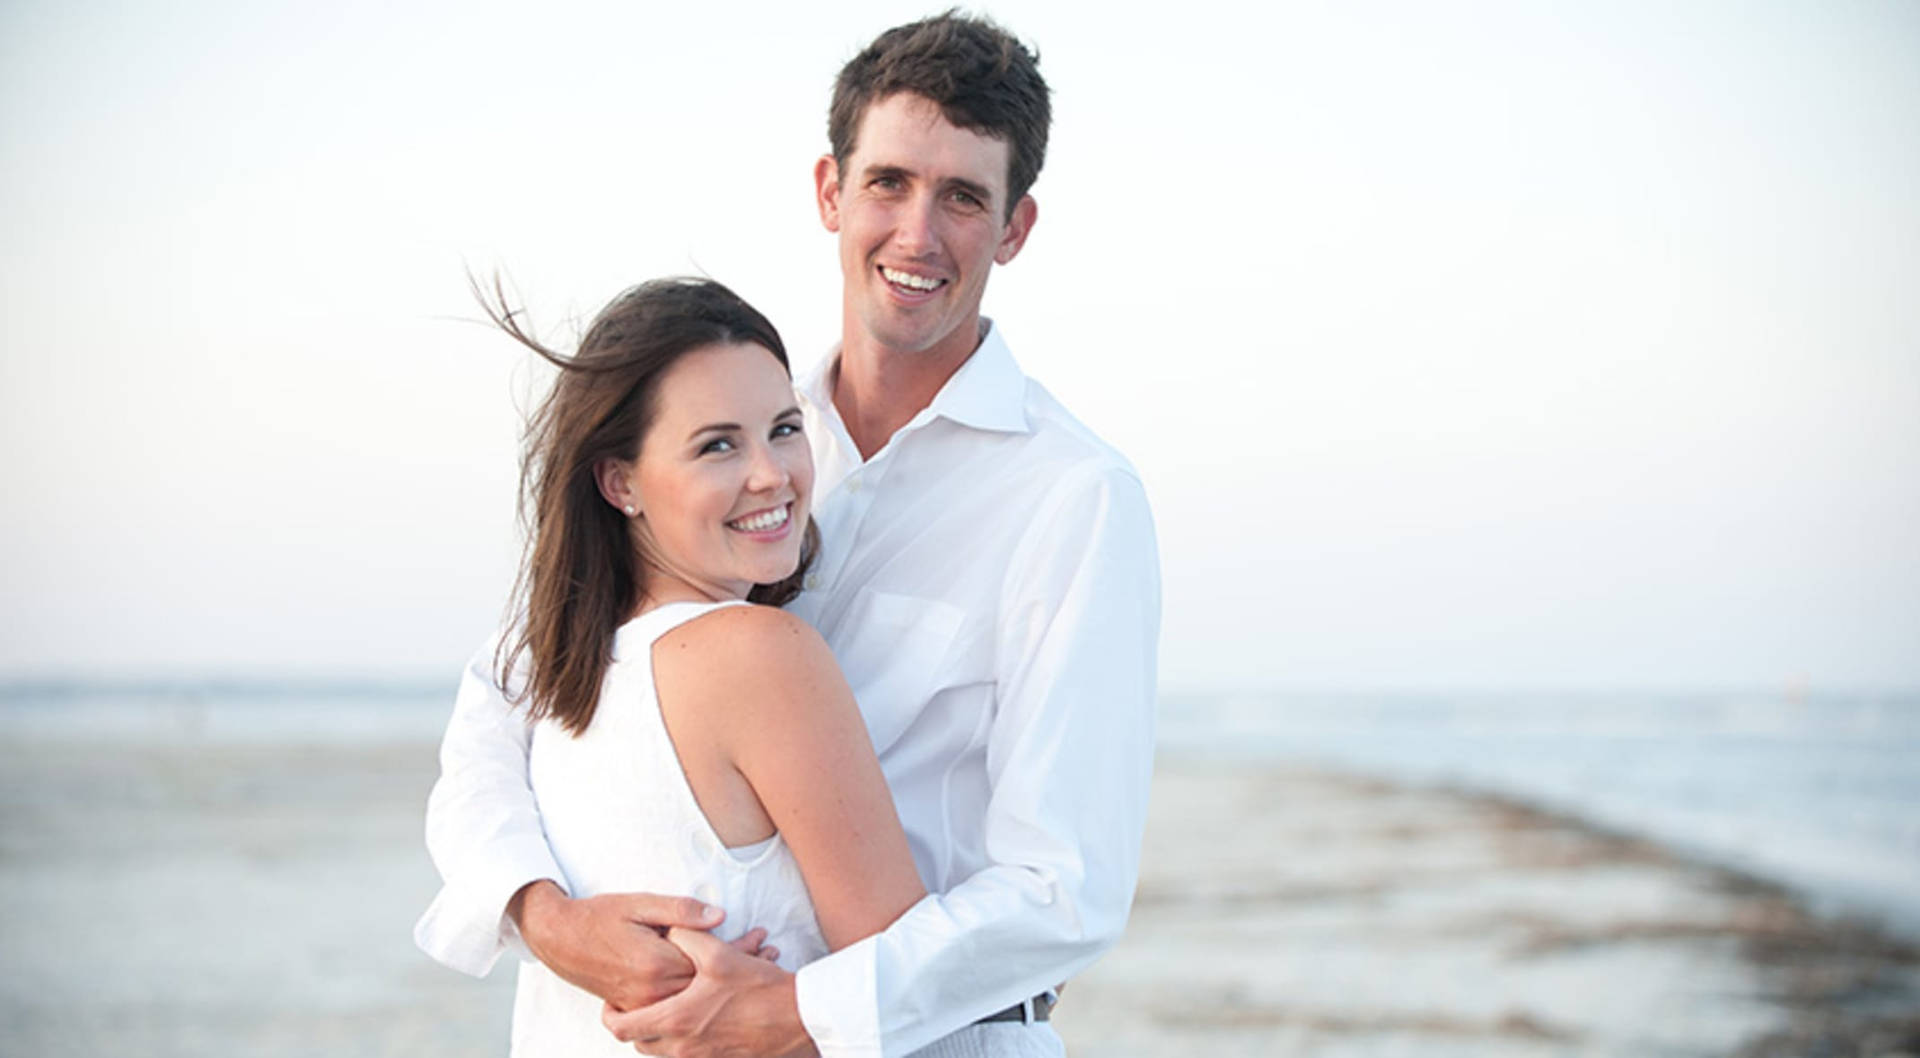 Chesson Hadley With Wife On Beach Wallpaper